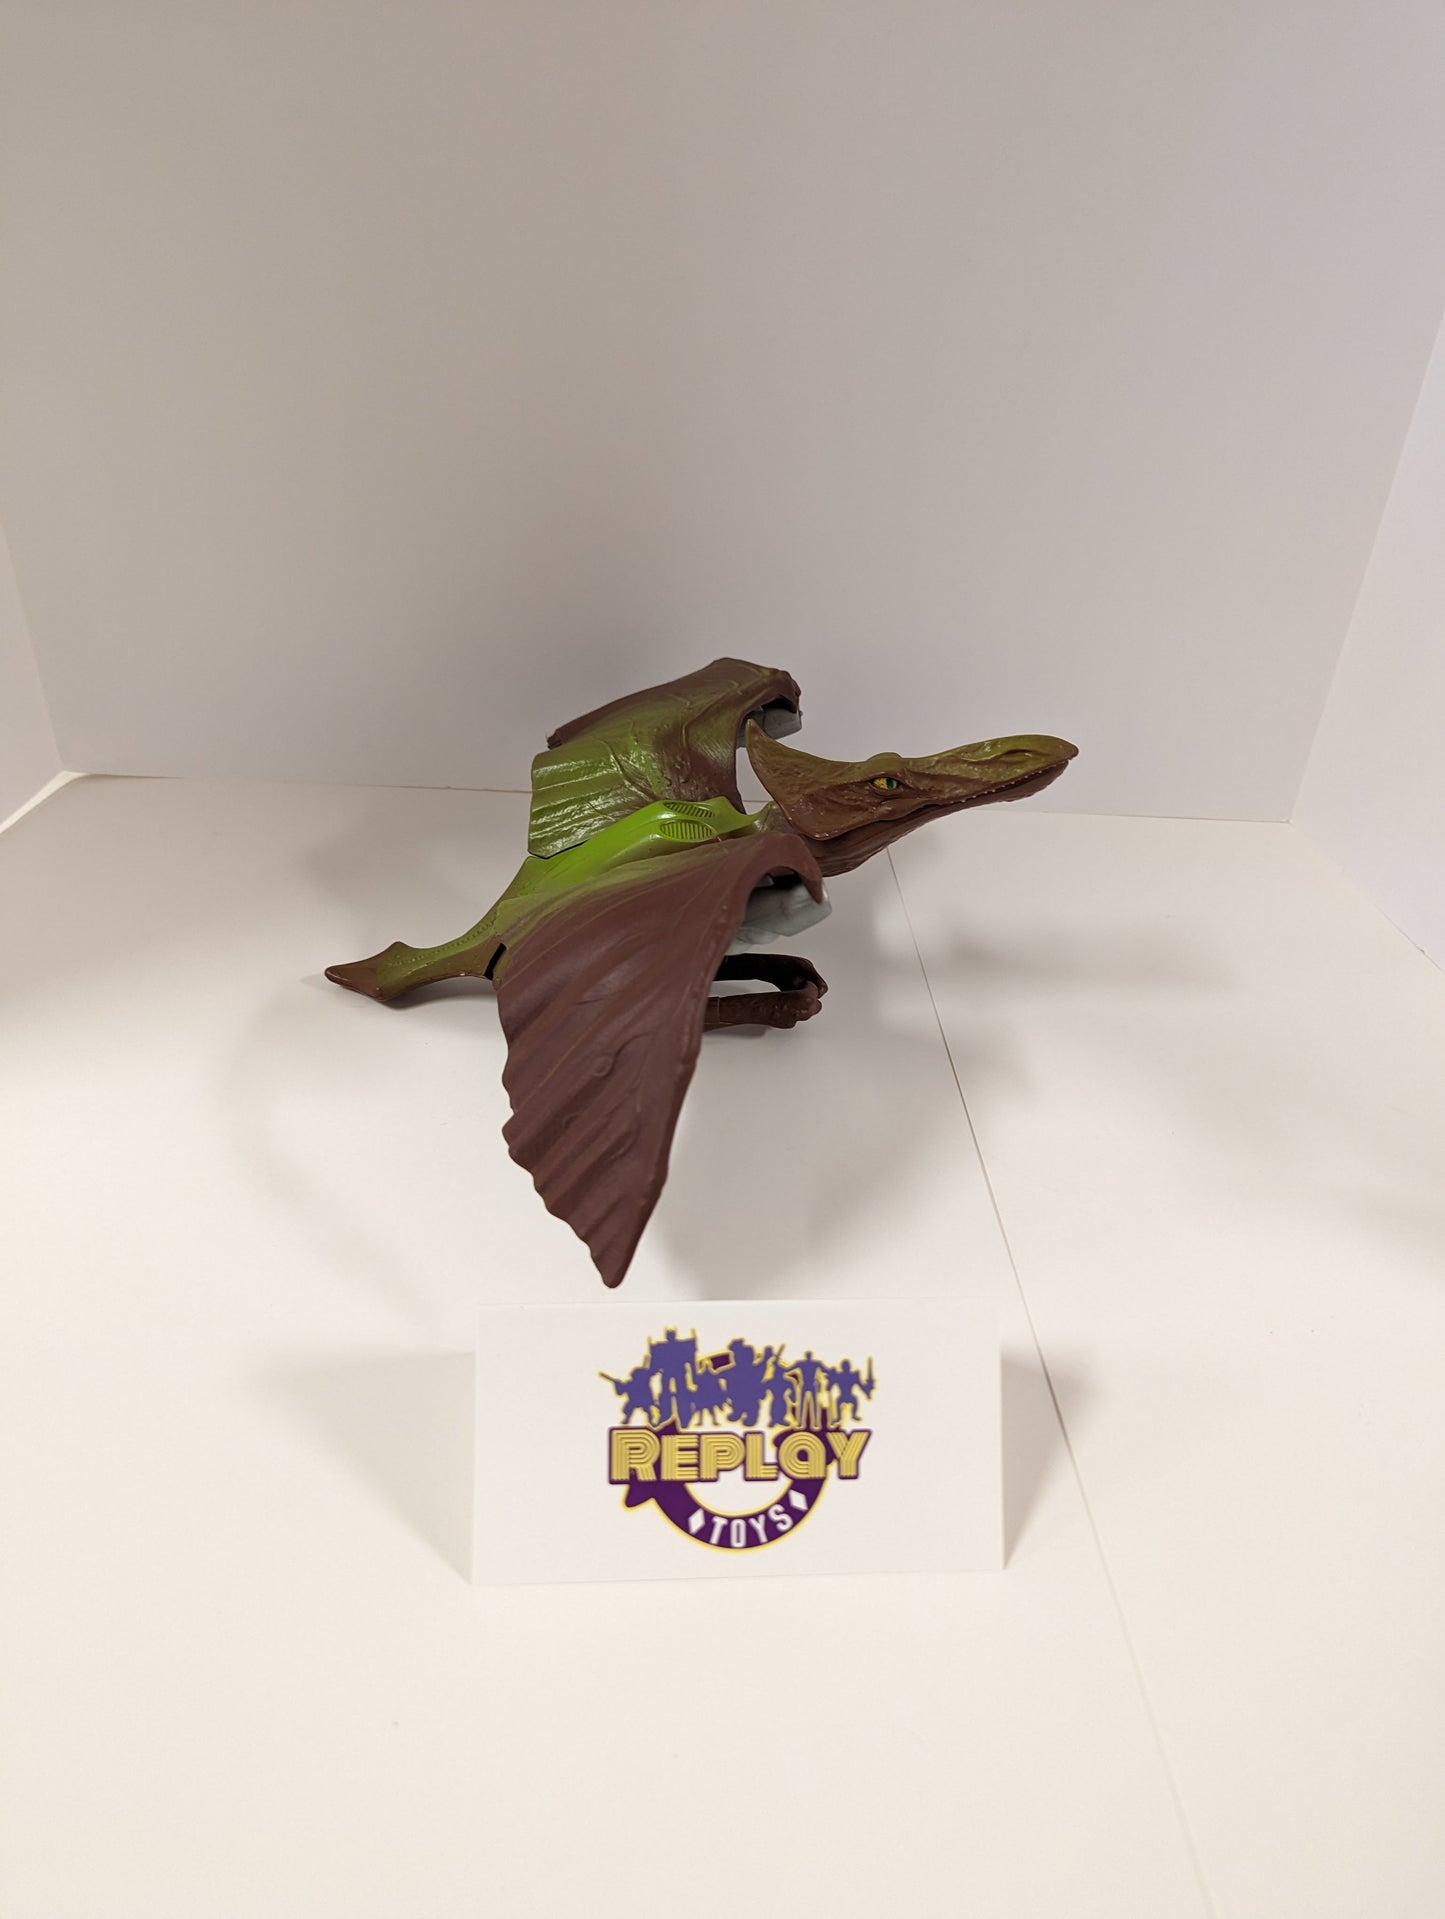 Vintage He-Man and the Masters of the Universe (MOTU) TURBODACTYL PTERODACTYL